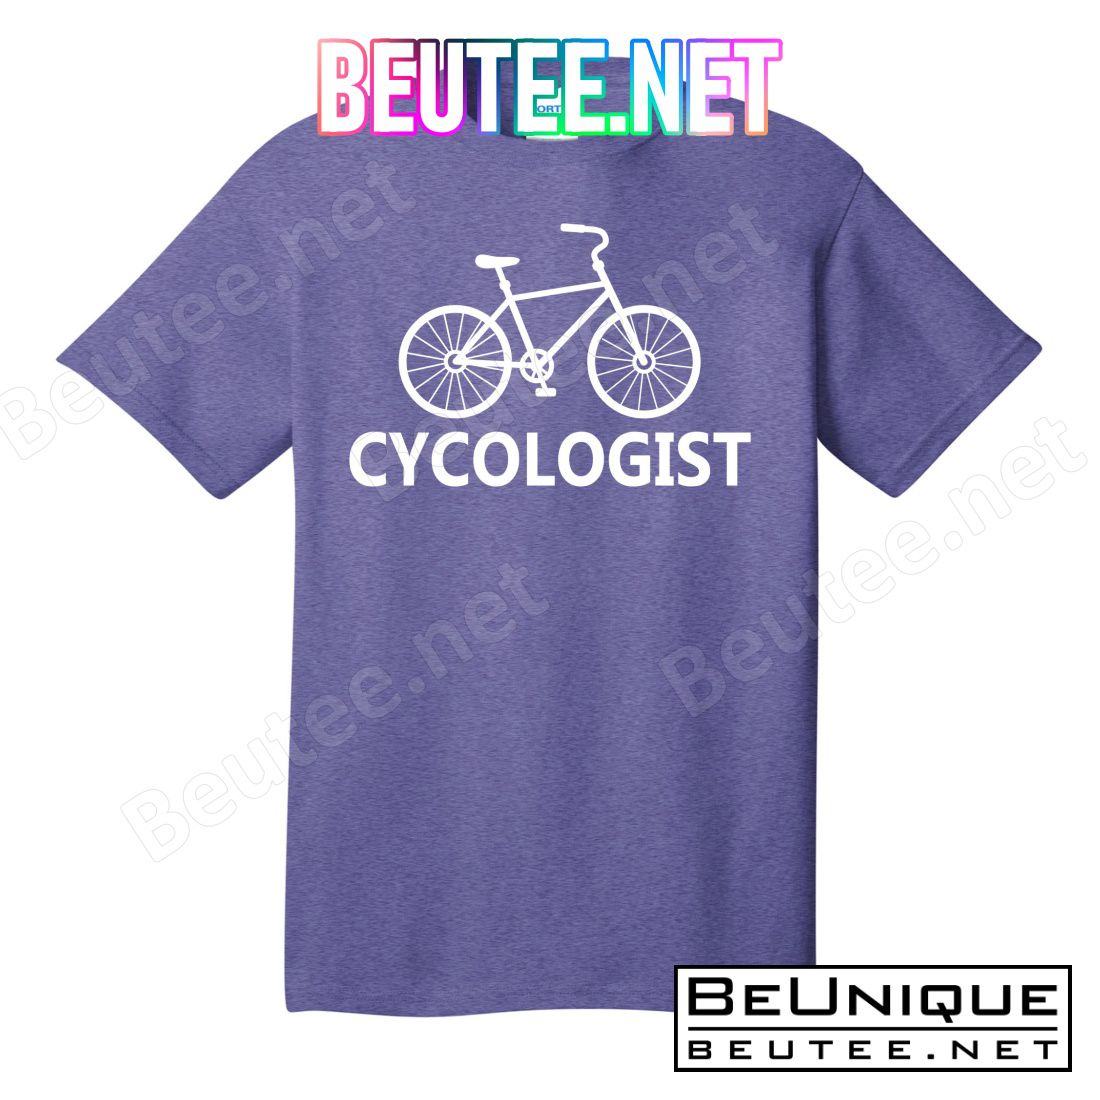 Cycologist Cycling Bicycle T-Shirts Tank Top